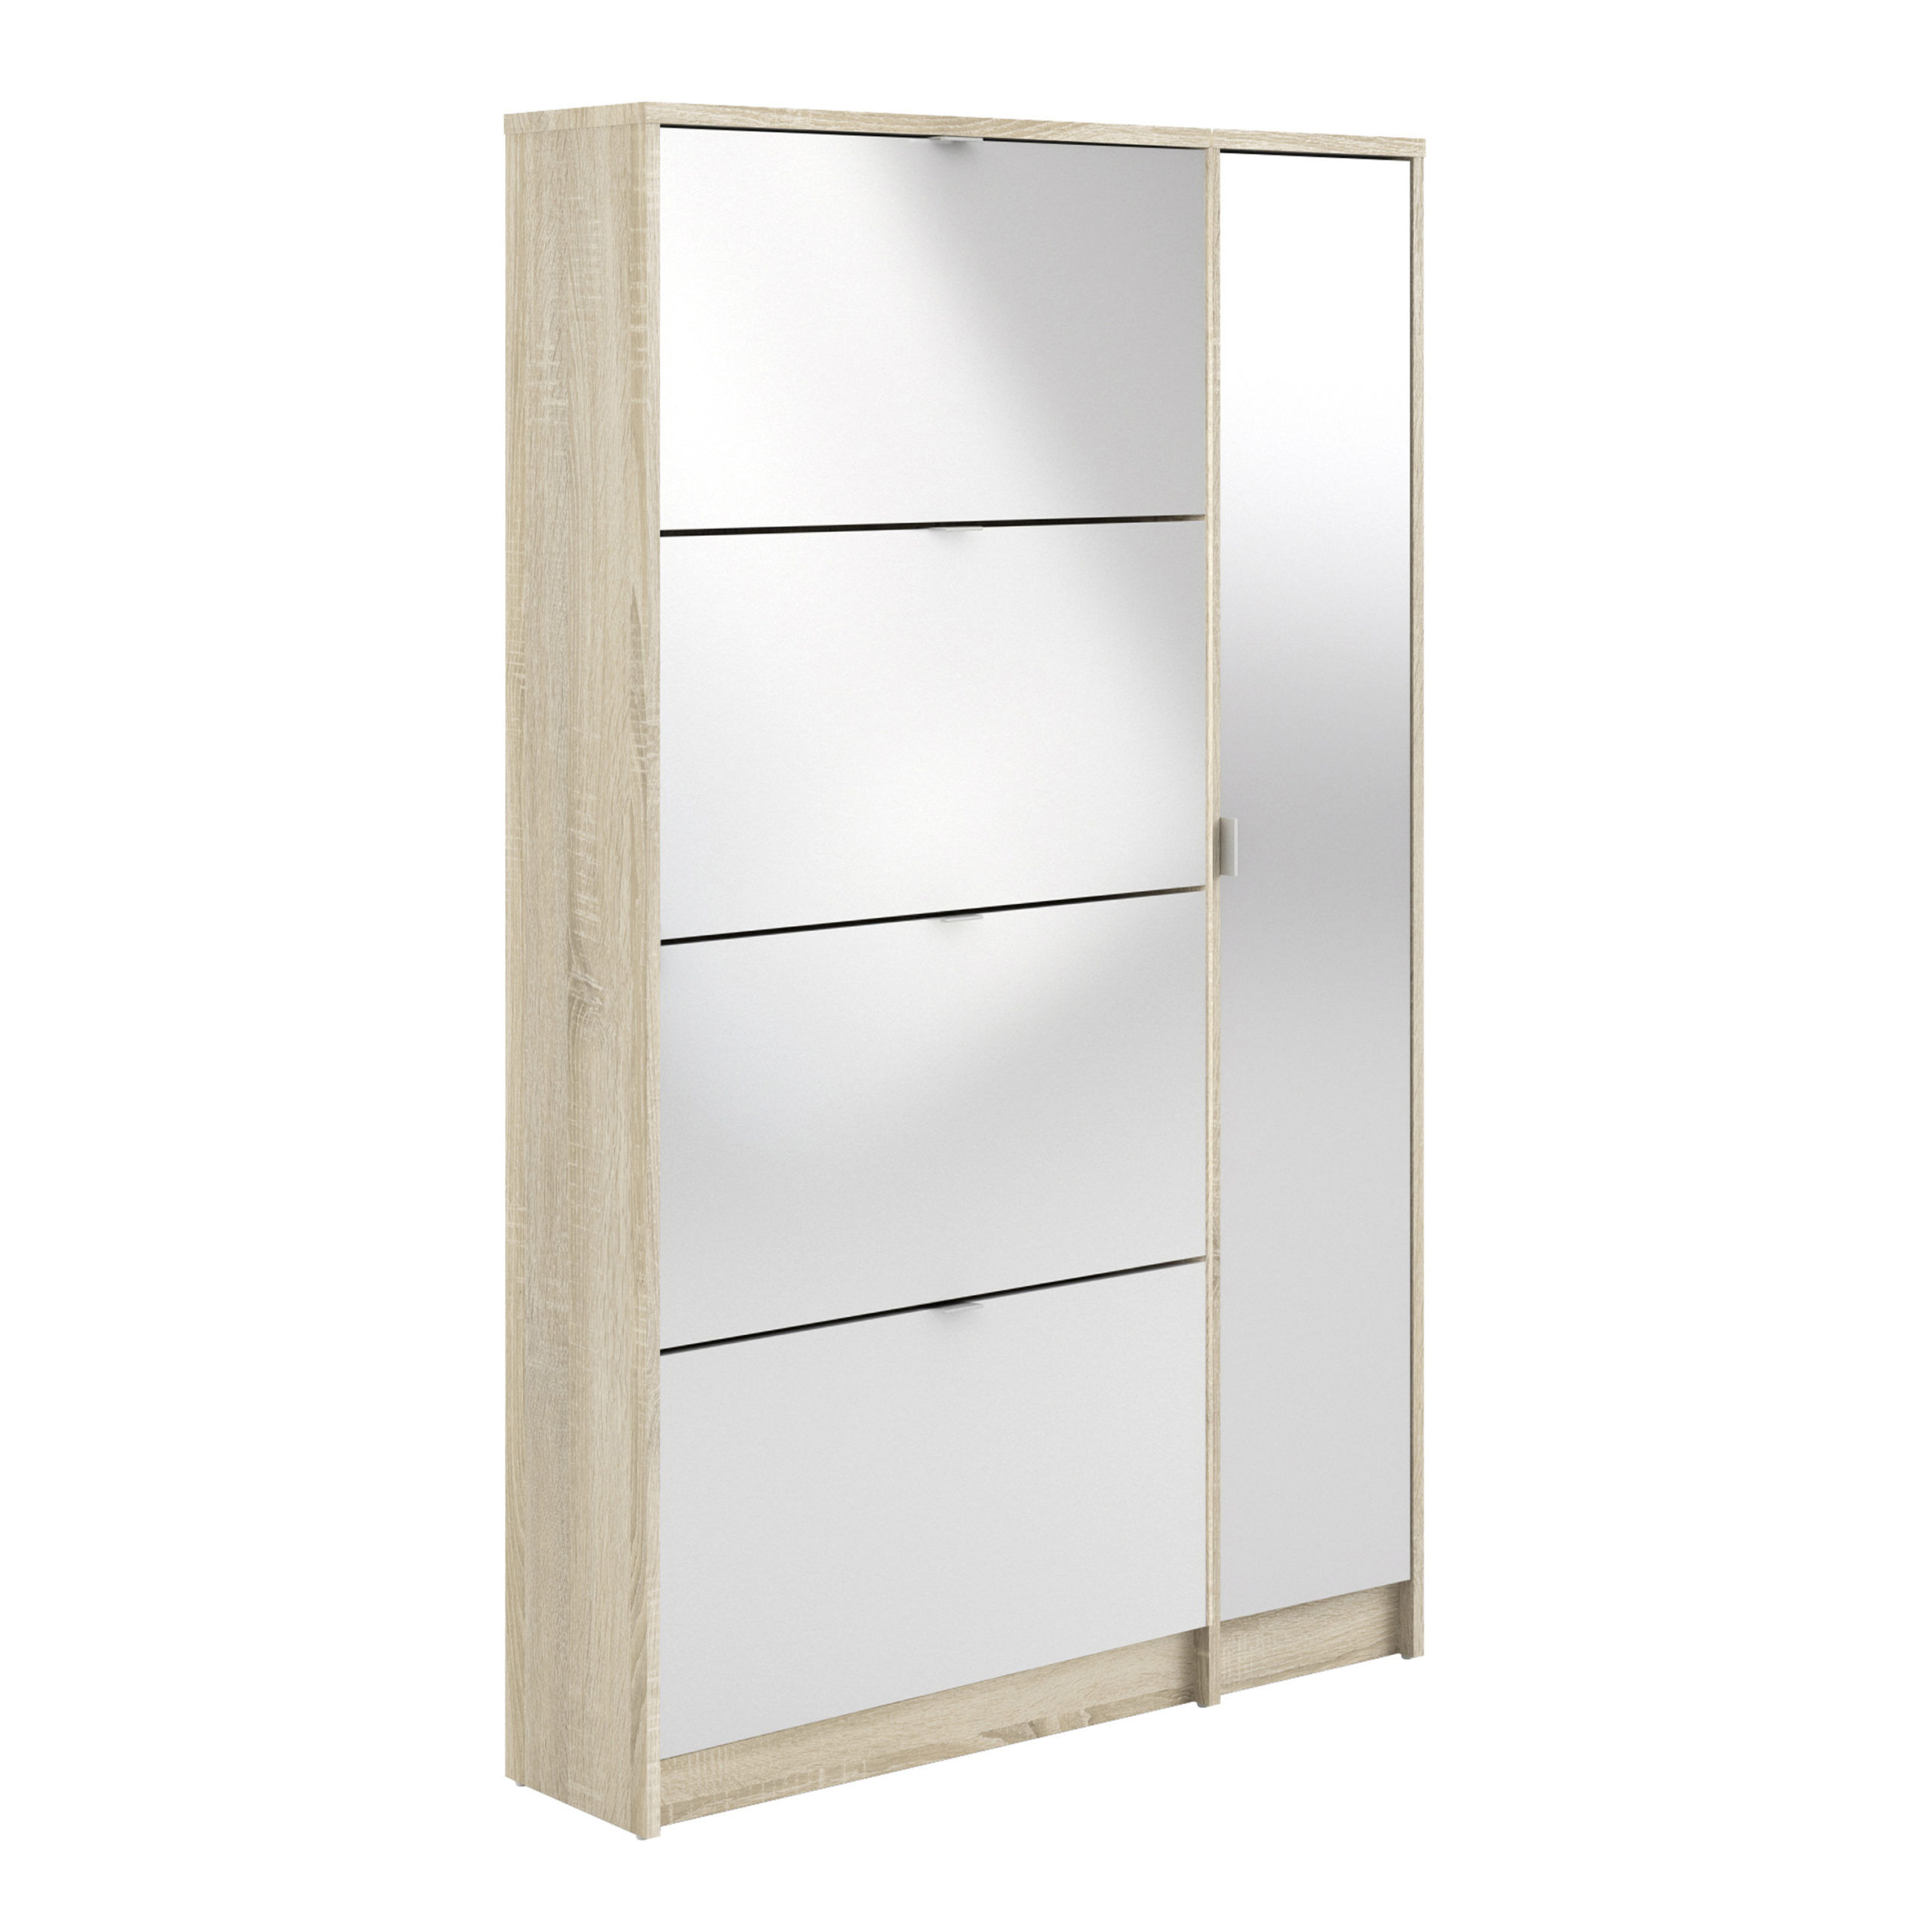 Luxor Shoe Cabinet Collection With 4 Tilting Doors and 2 Layers +  1 Mirror Door   Self Assembly